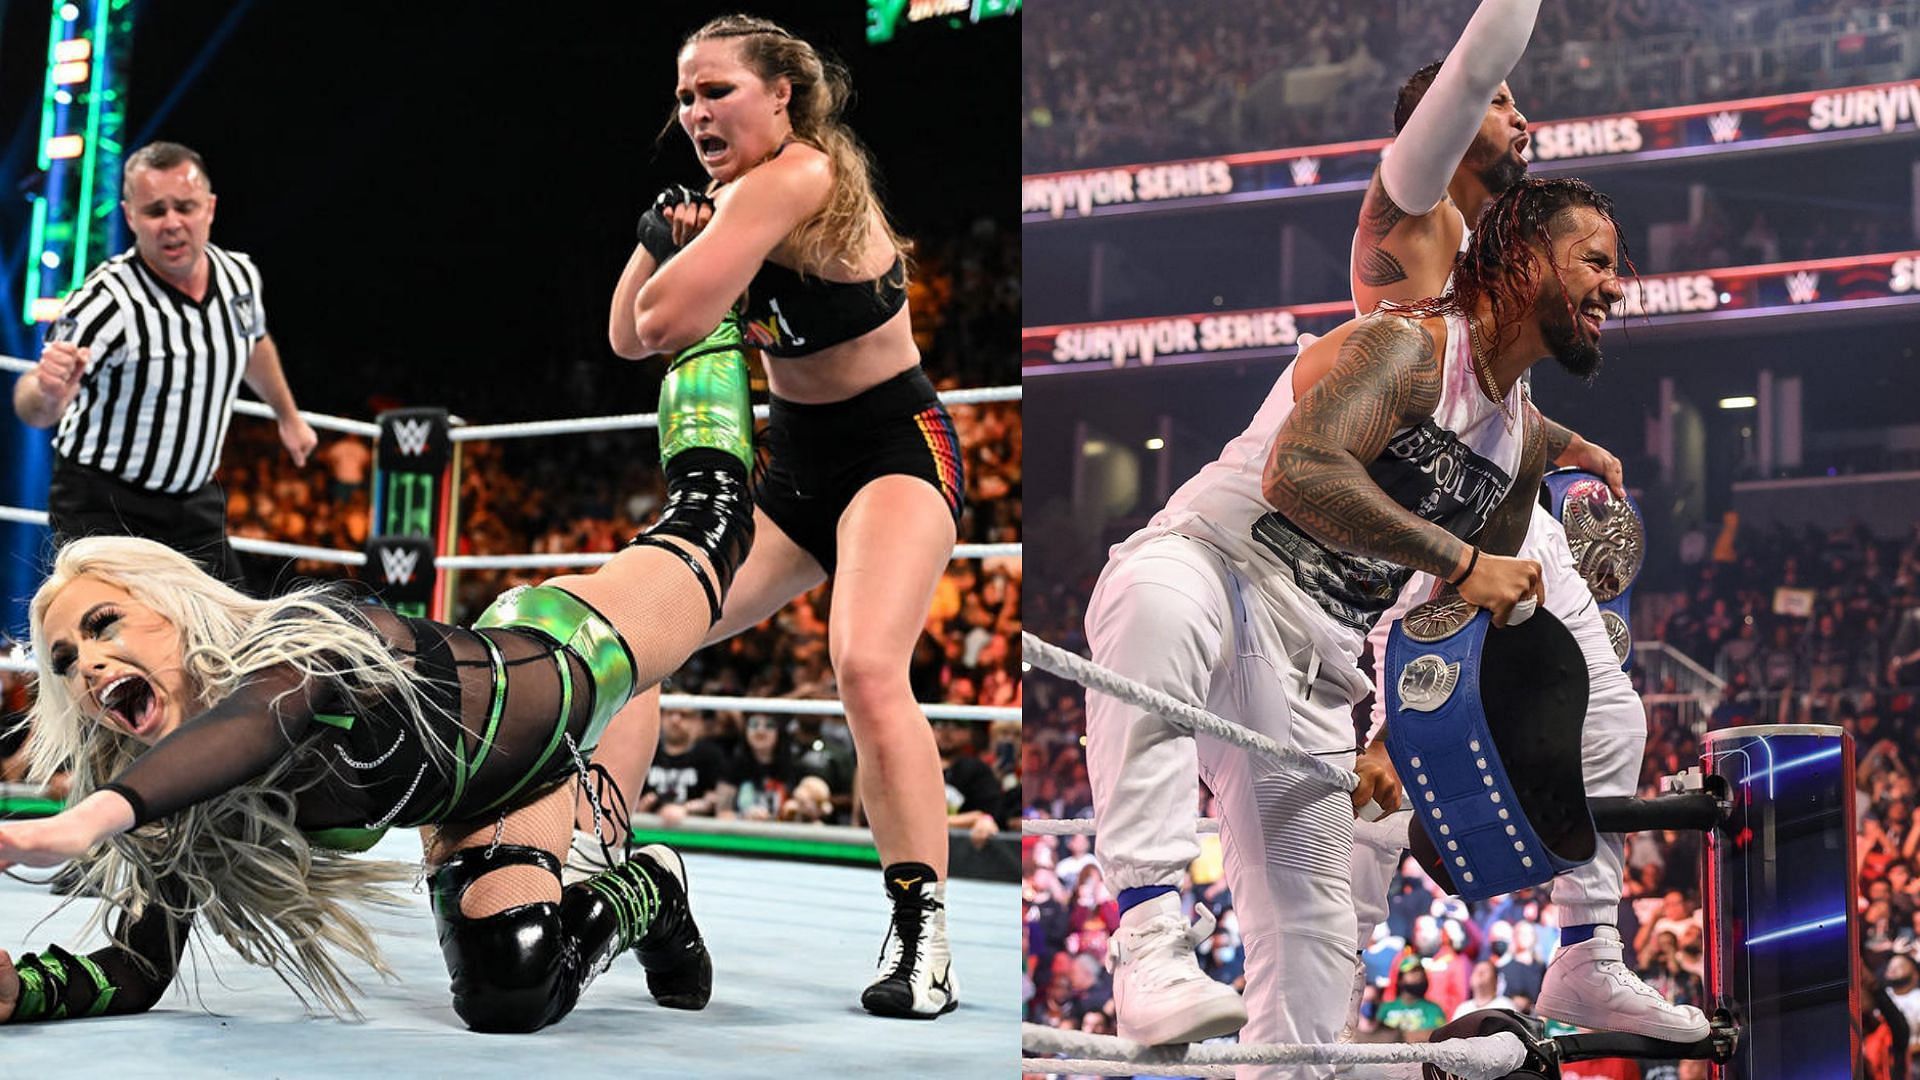 Money in the Bank 2022 had several surprising moments